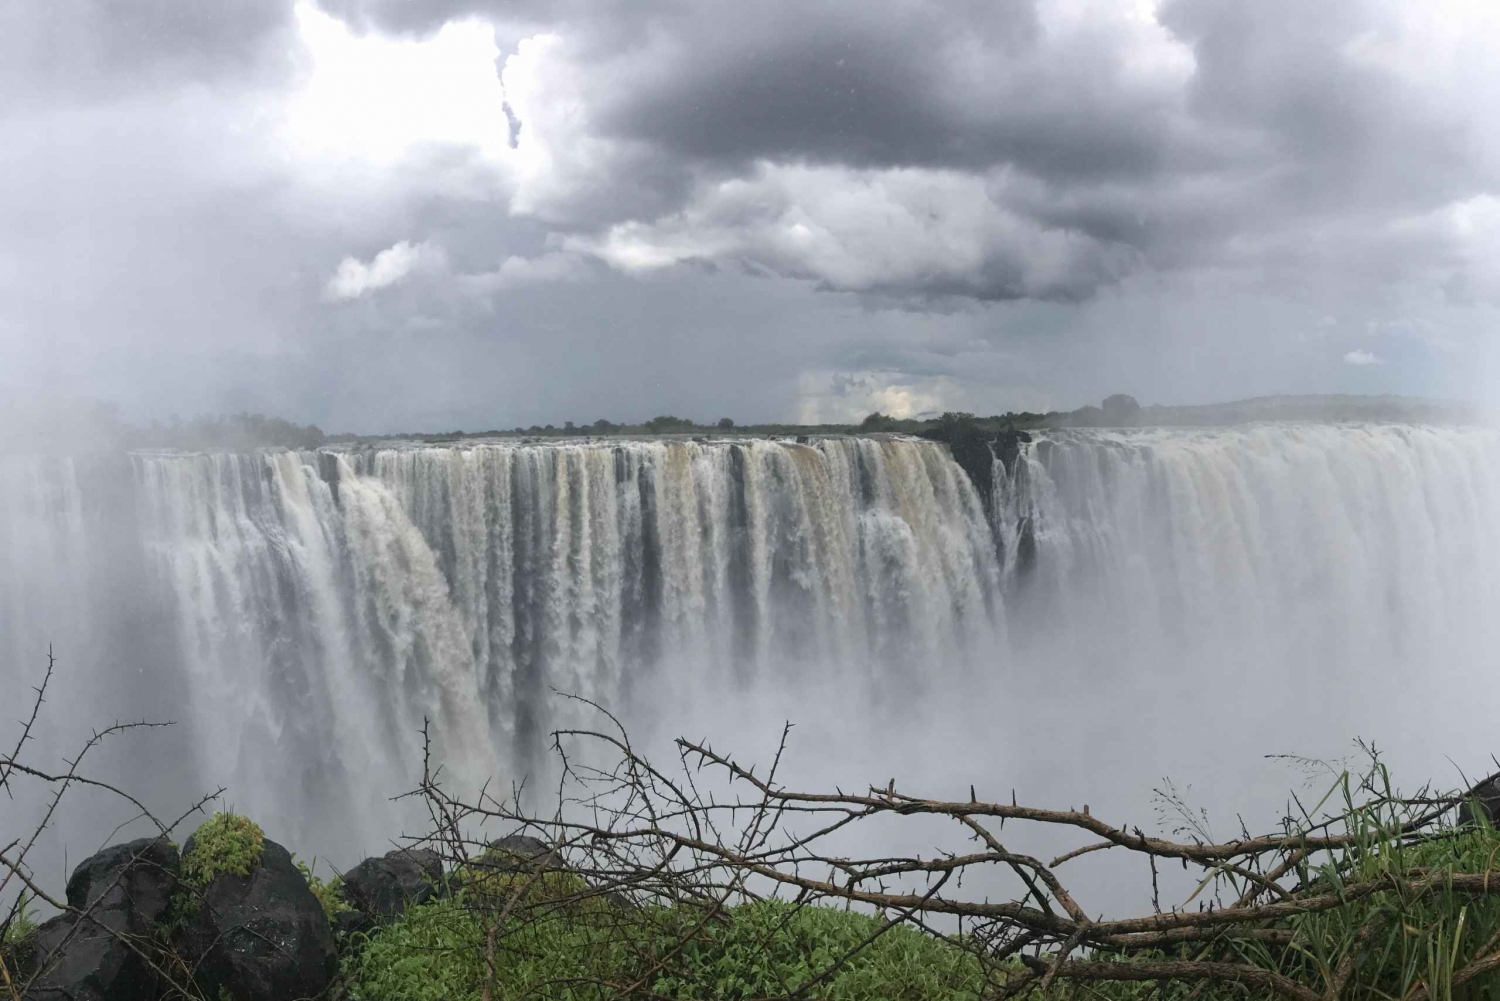 Guided Tour Of the Victoria Falls Water Fall